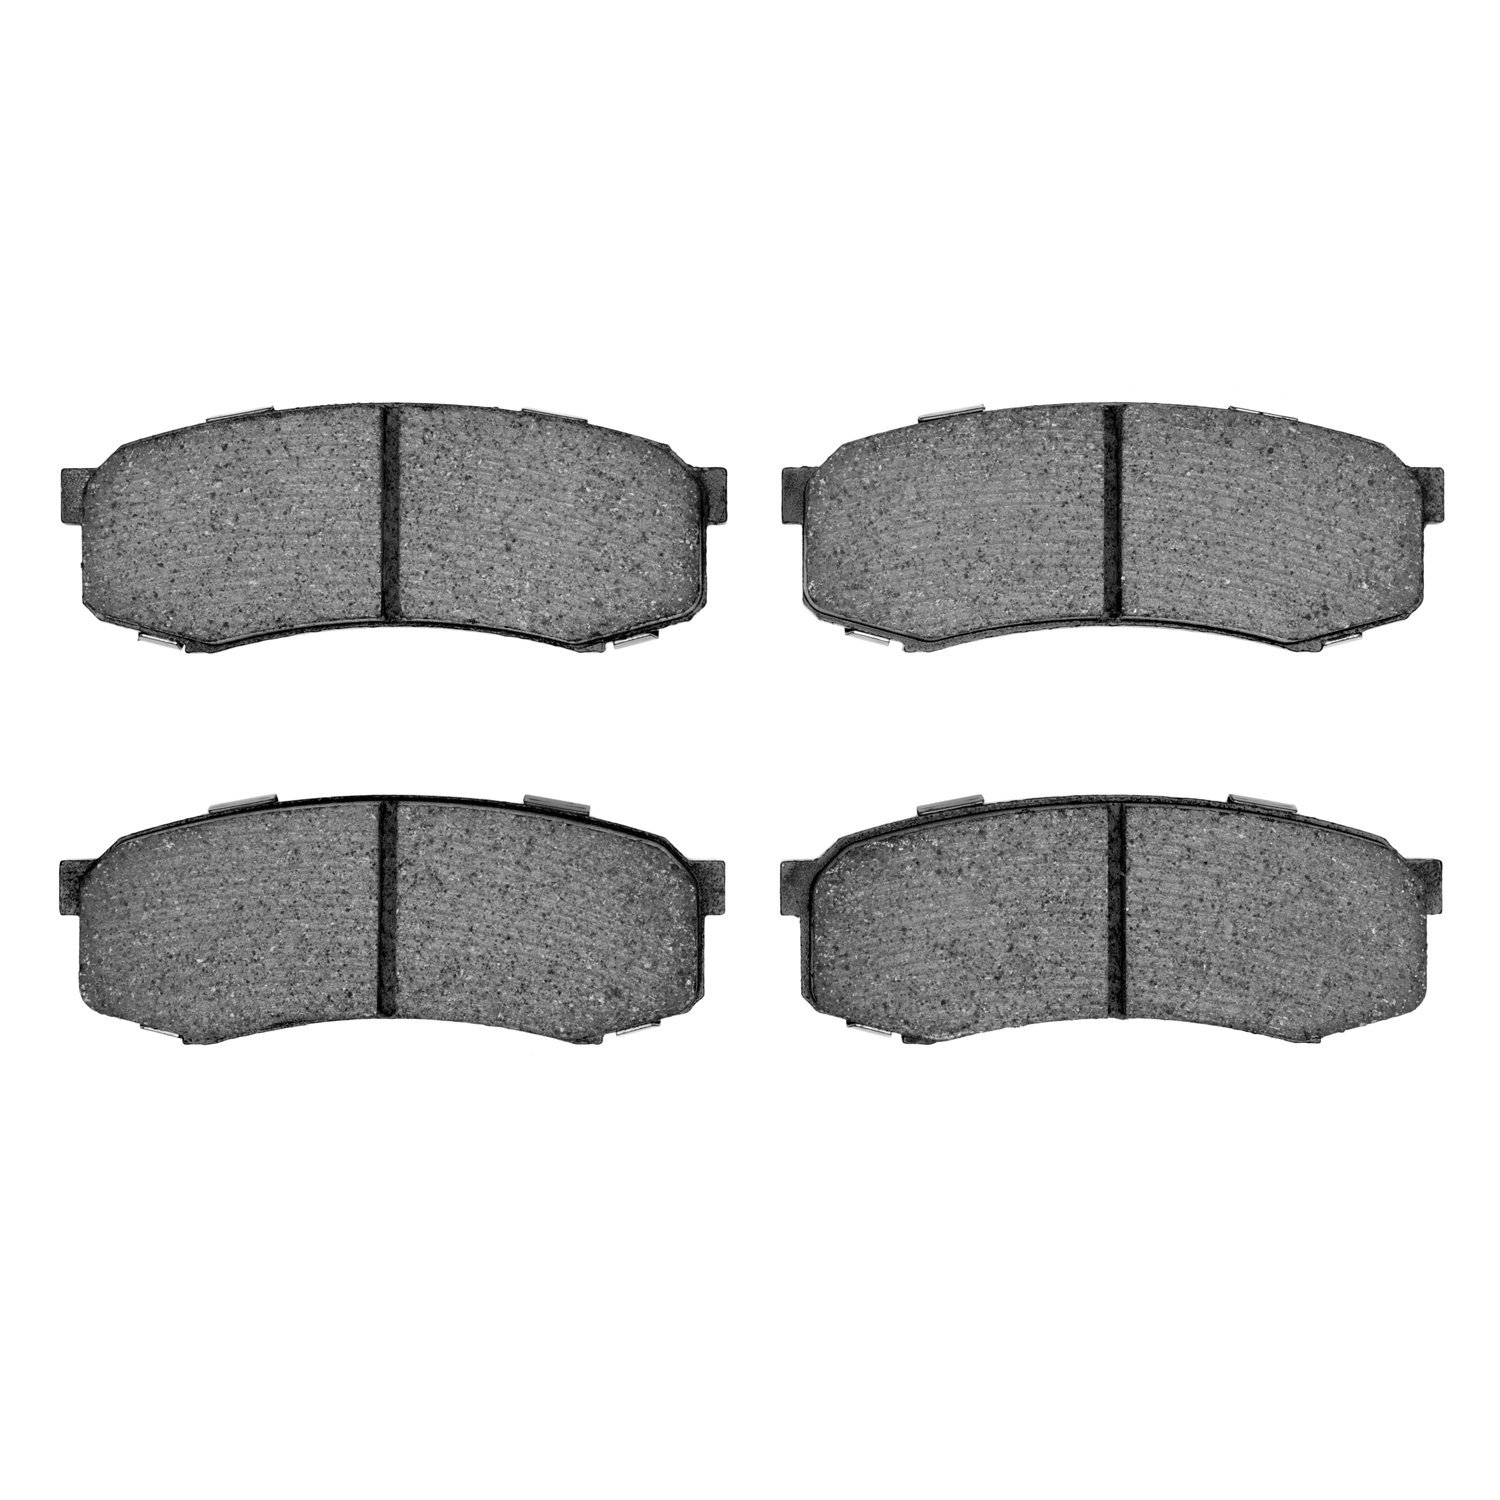 Performance Off-Road/Tow Brake Pads, Fits Select Fits Multiple Makes/Models, Position: Rear